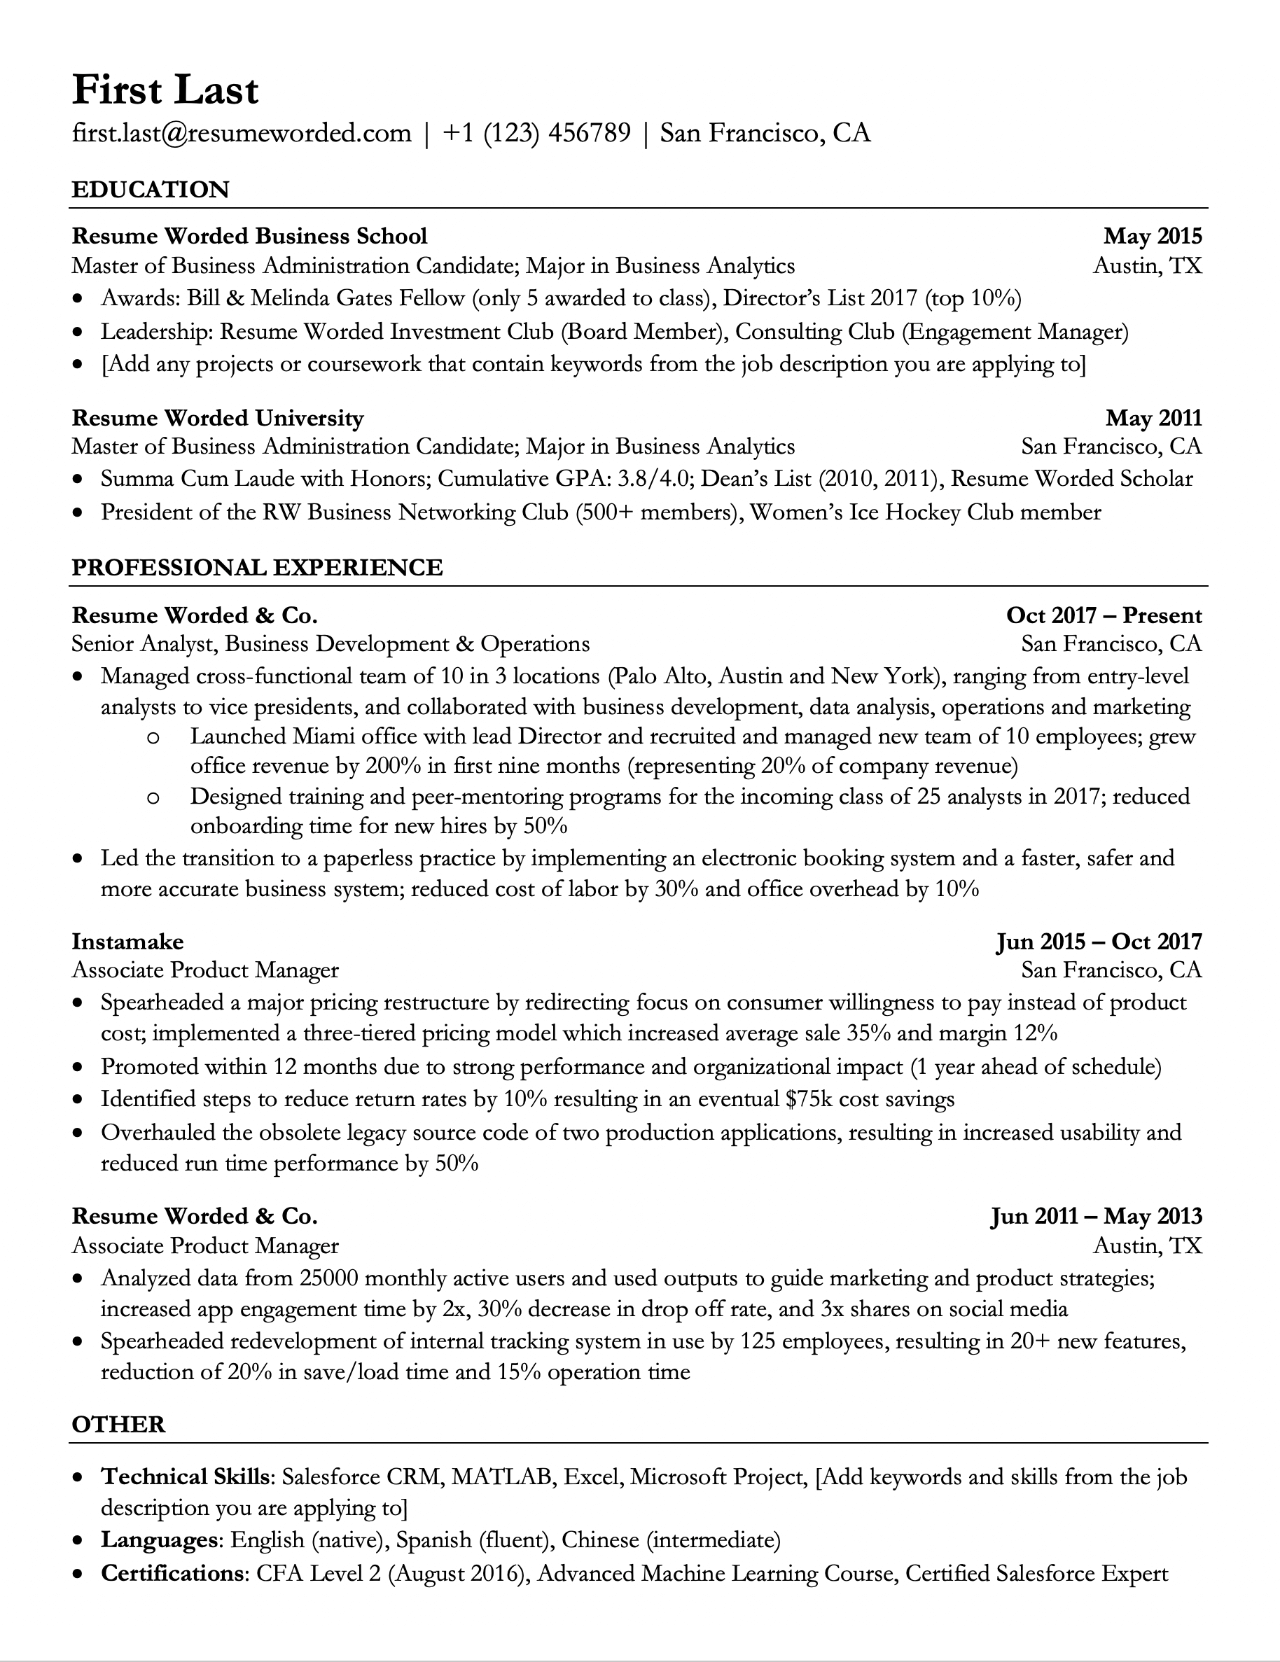 professional ats resume templates for experienced hires and college students or grads  for free